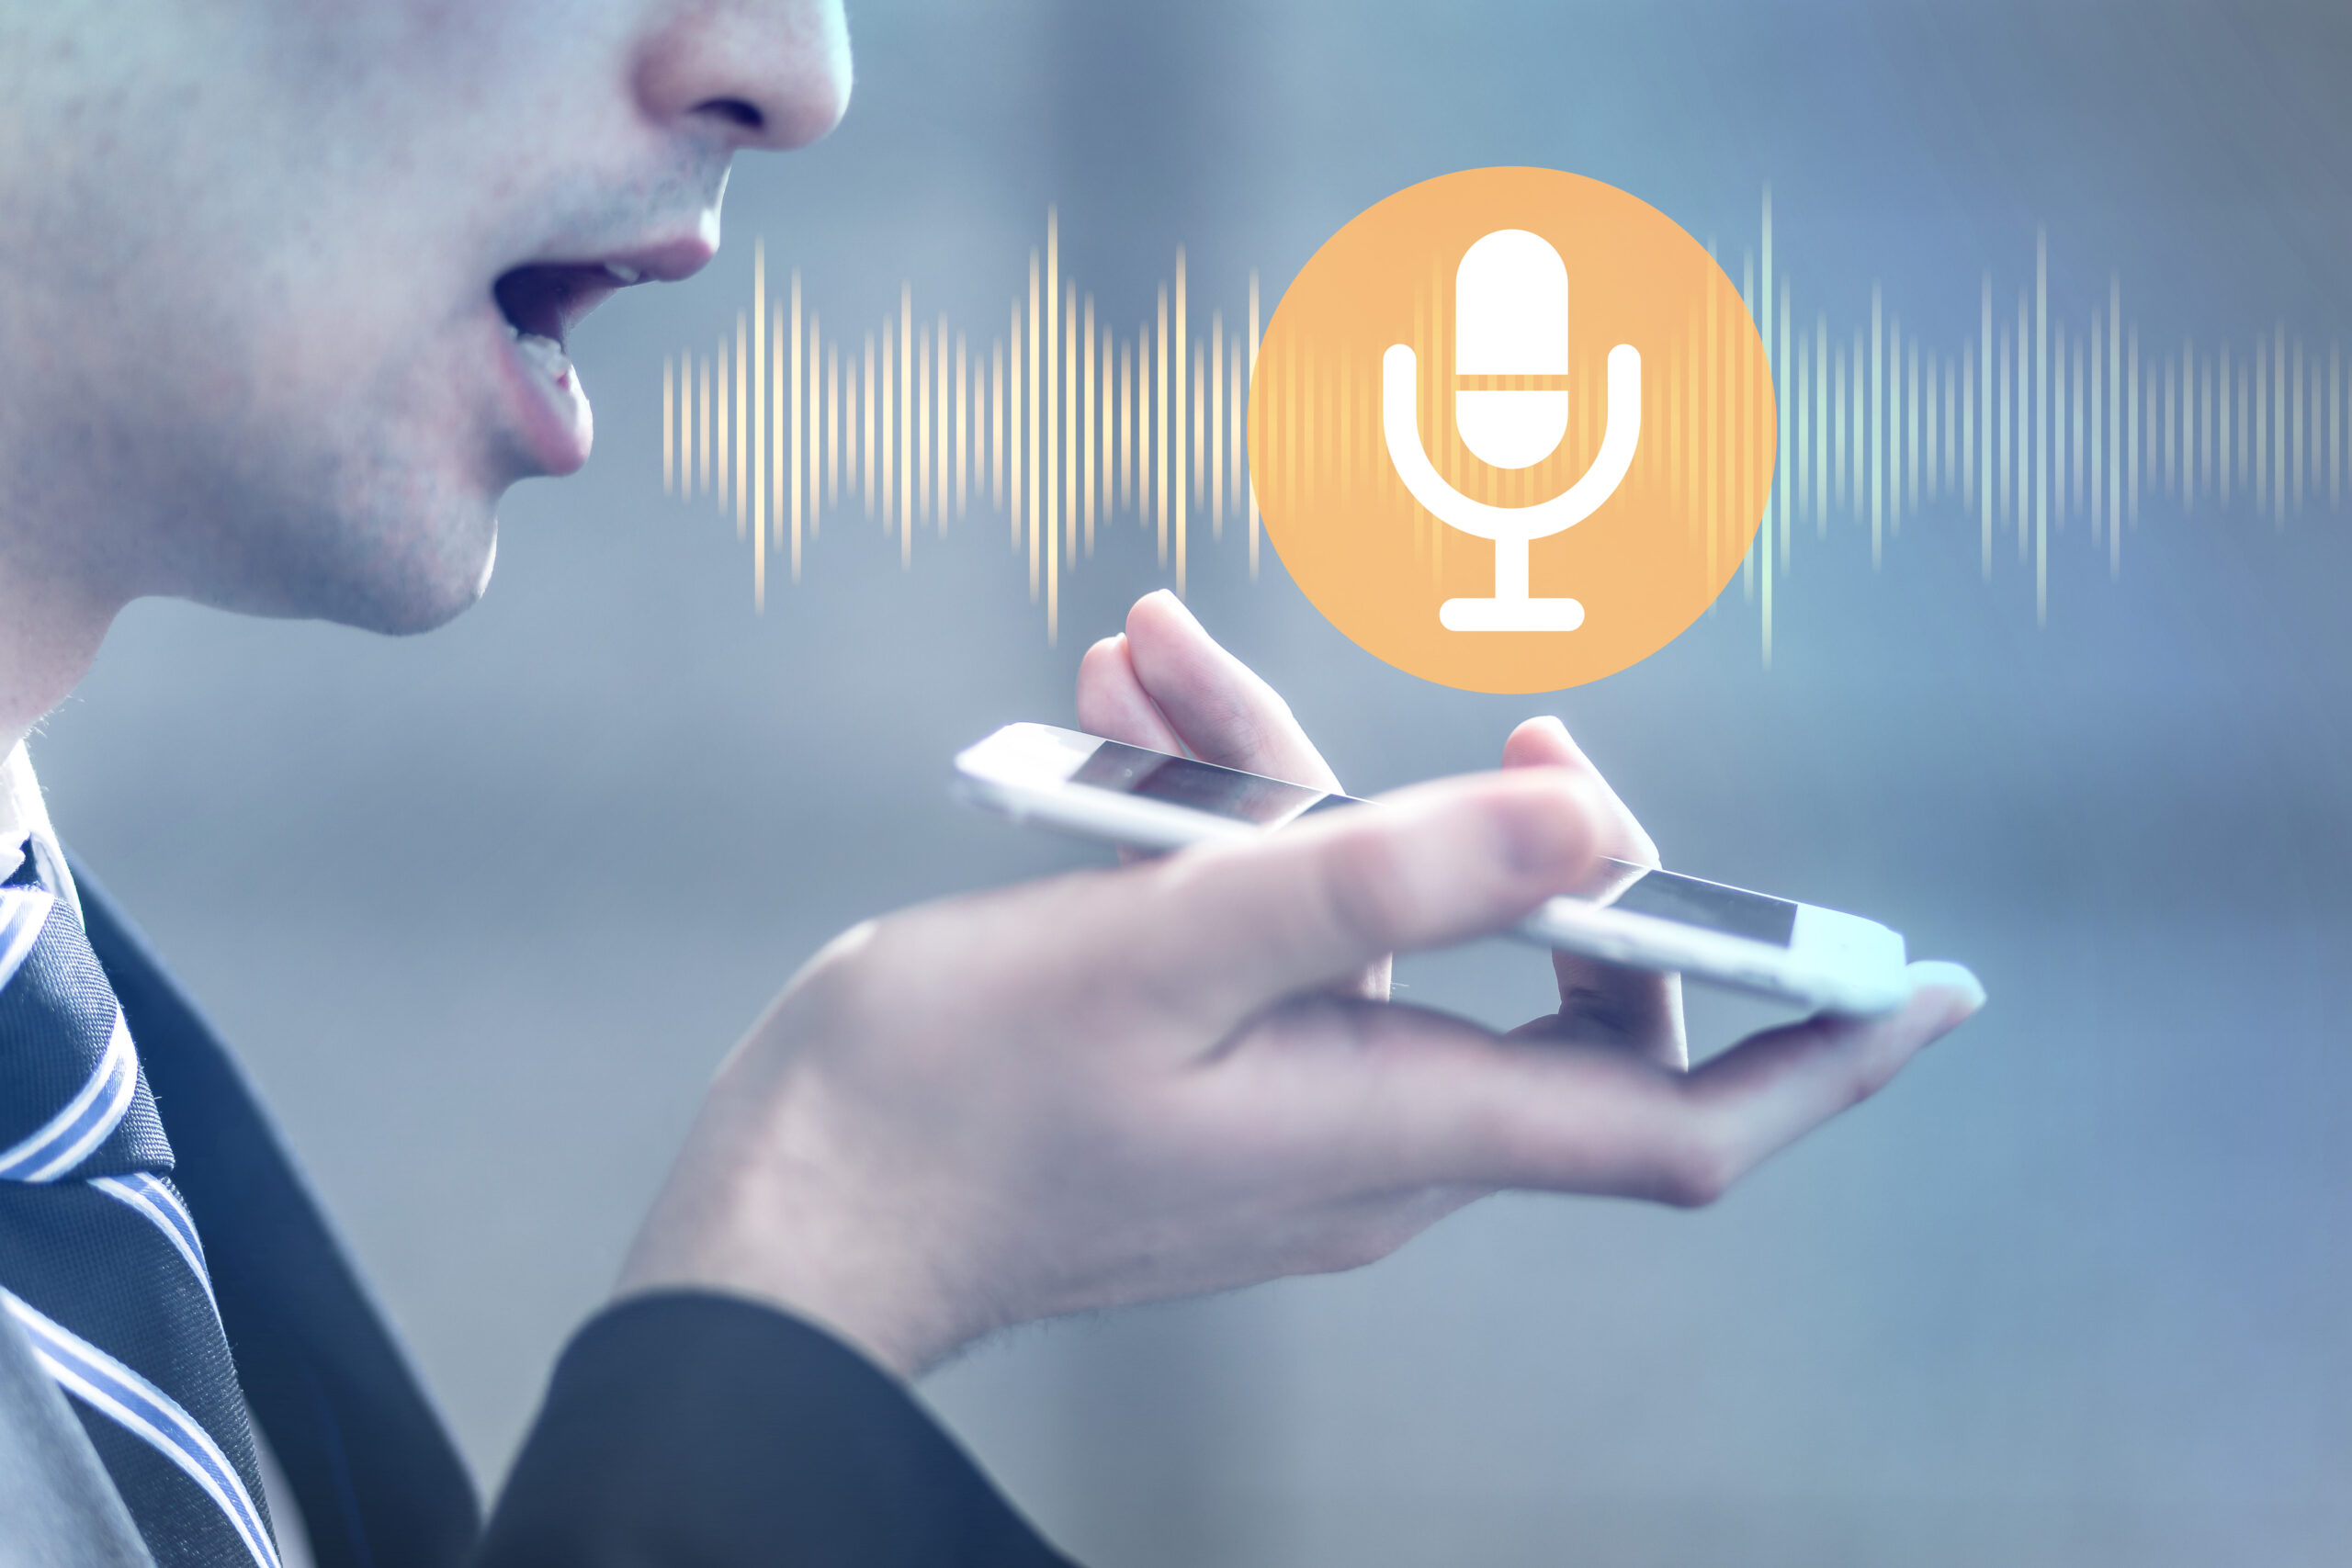 voice recognition with smart phone